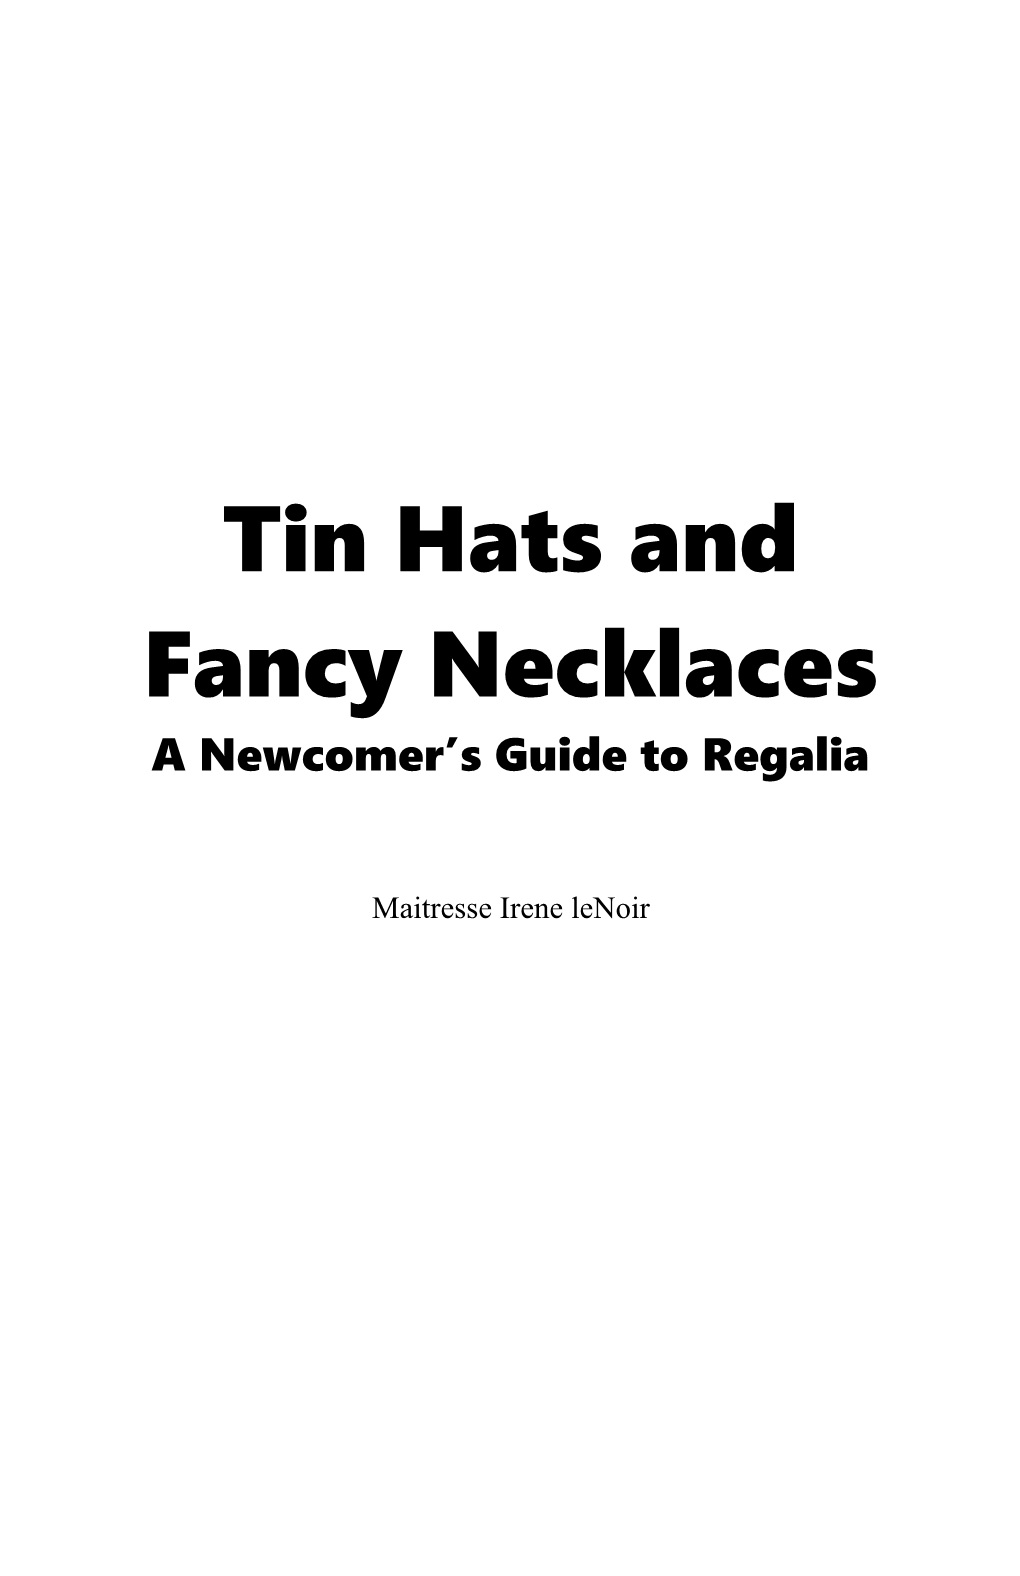 Tin Hats and Fancy Necklaces